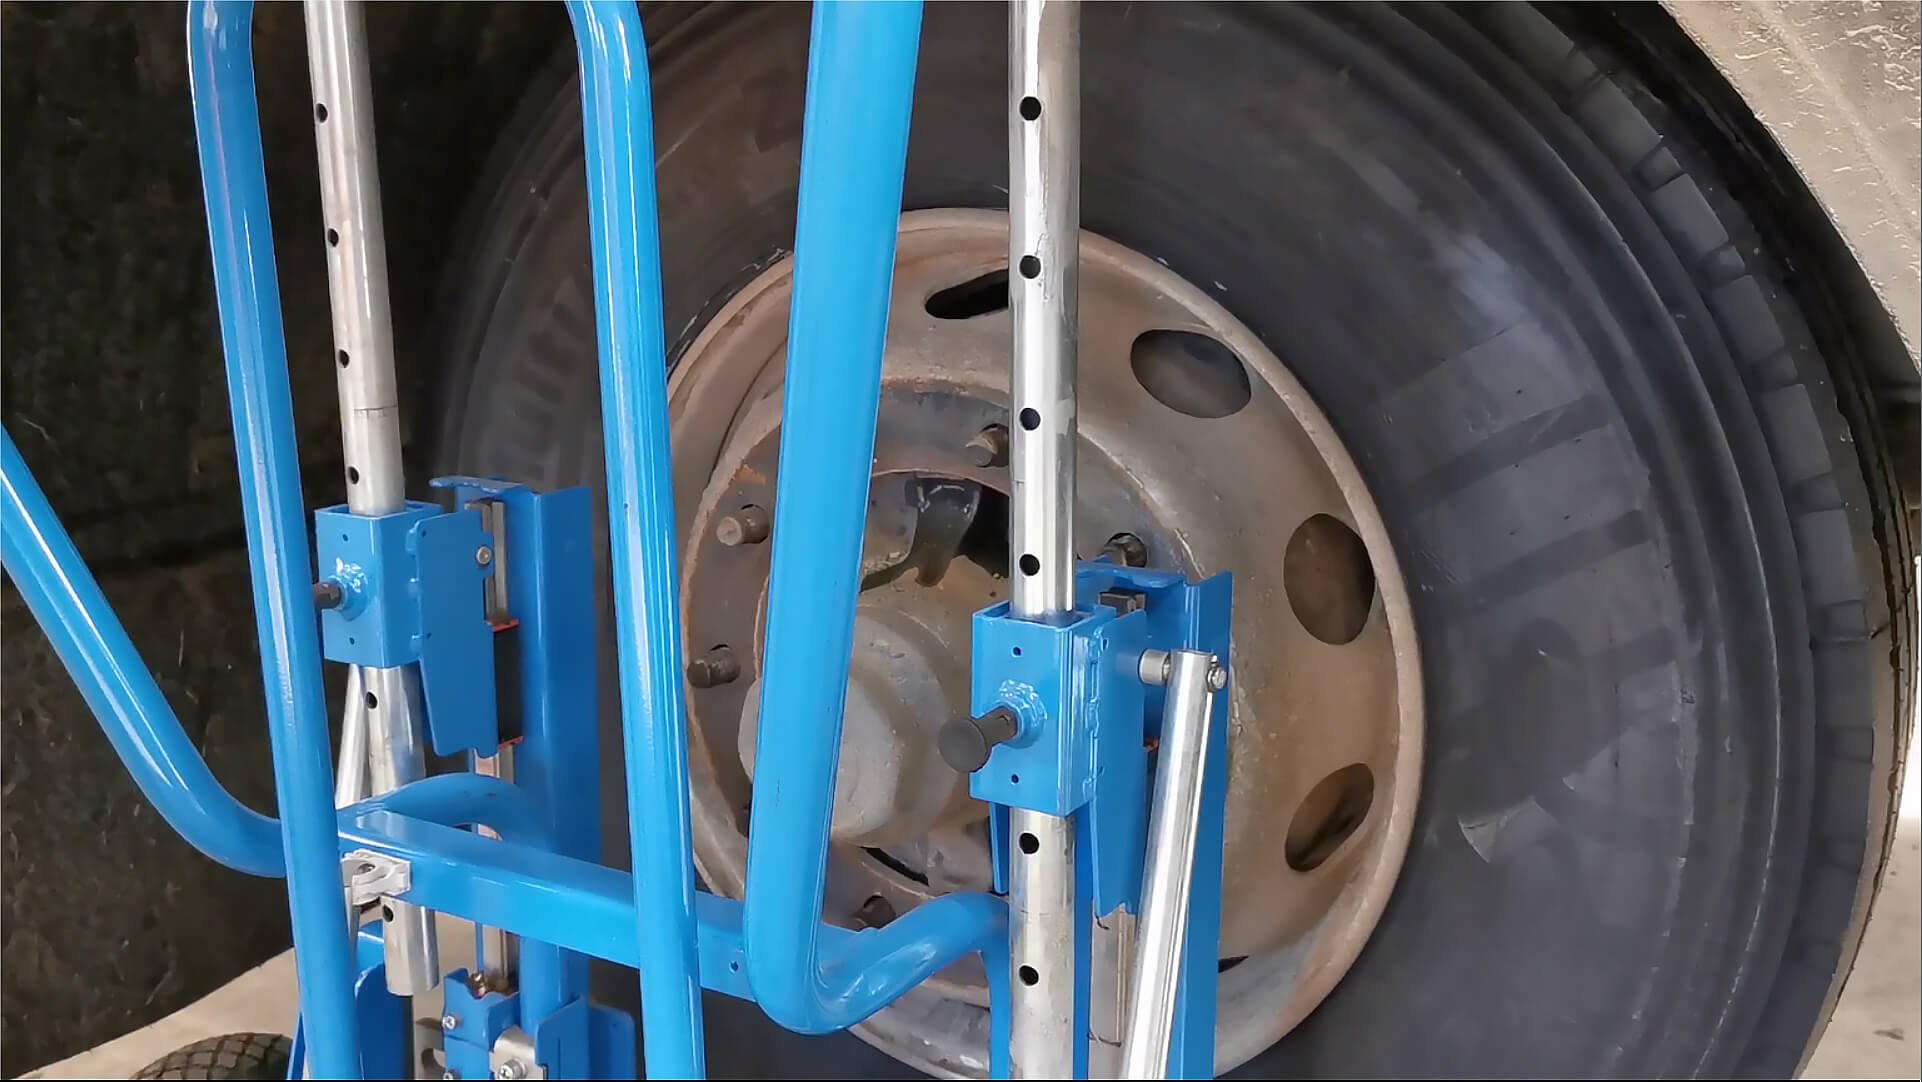 Easy to rotate wheel by hand for hub and bolt alignment using the built-in rollers